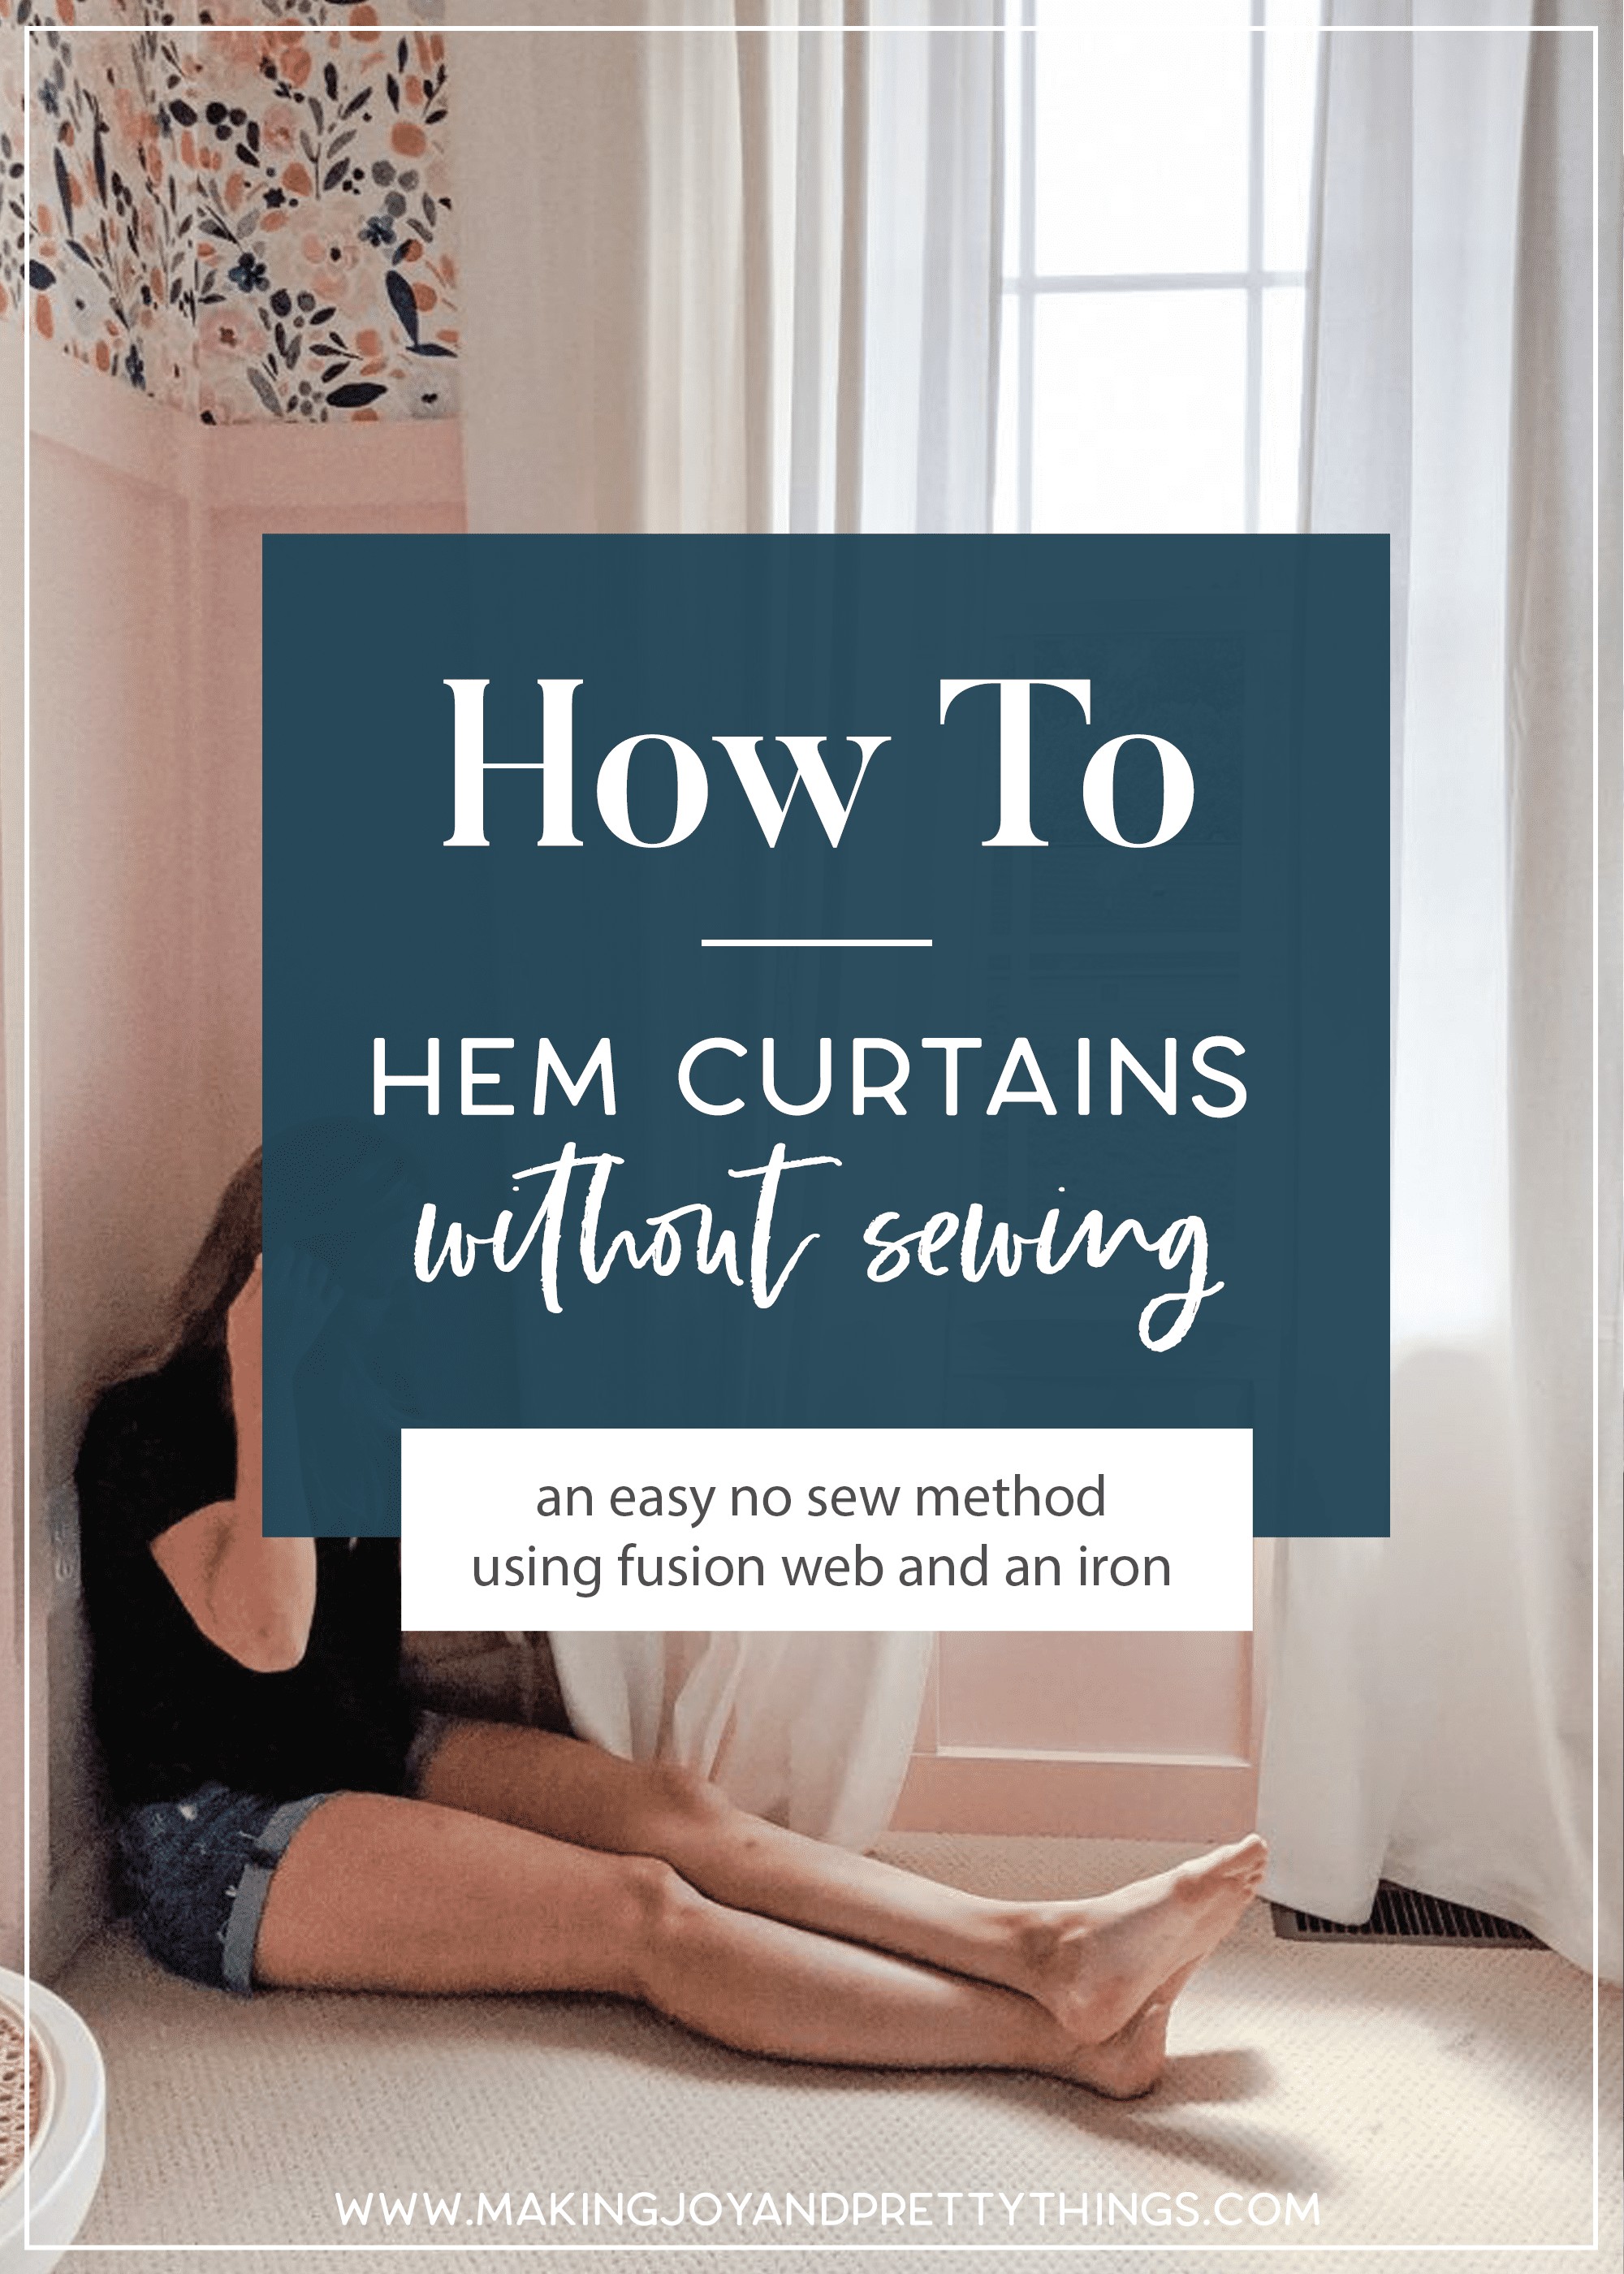 No-sew DIY curtain hemming! $3 for the tape and the rest you